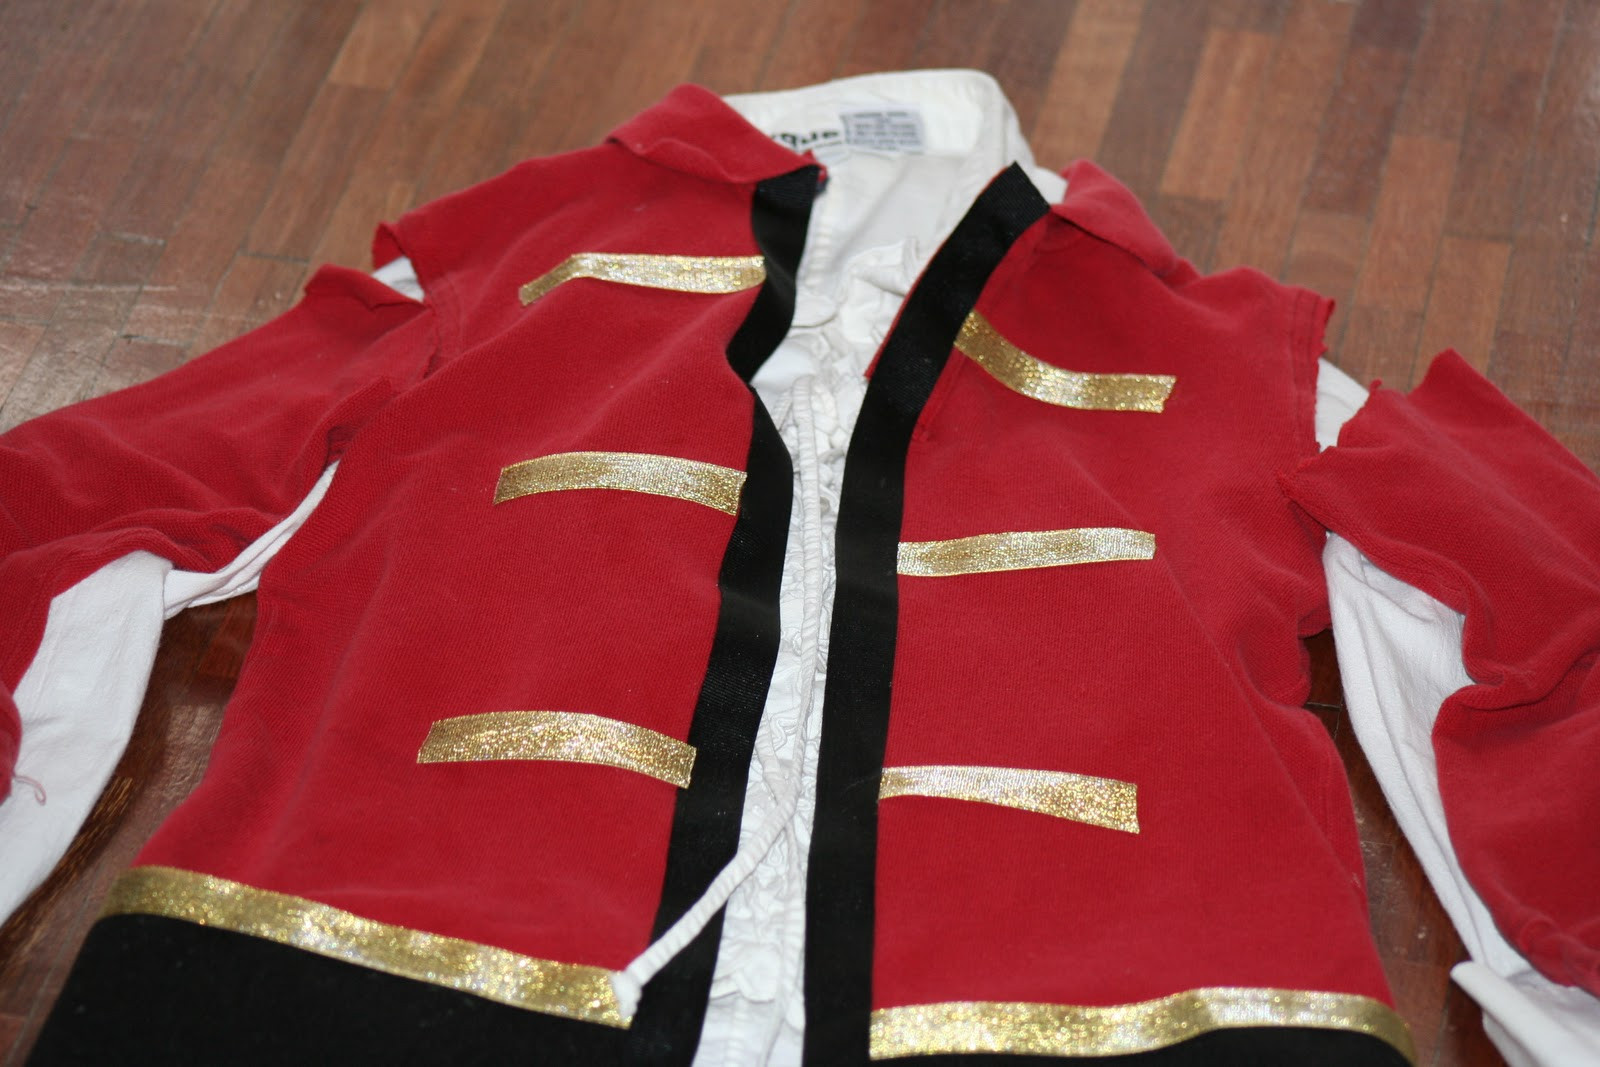 DIY Captain Hook Costumes
 How to Make a No Sew Captain Hook Costume From a T Shirt